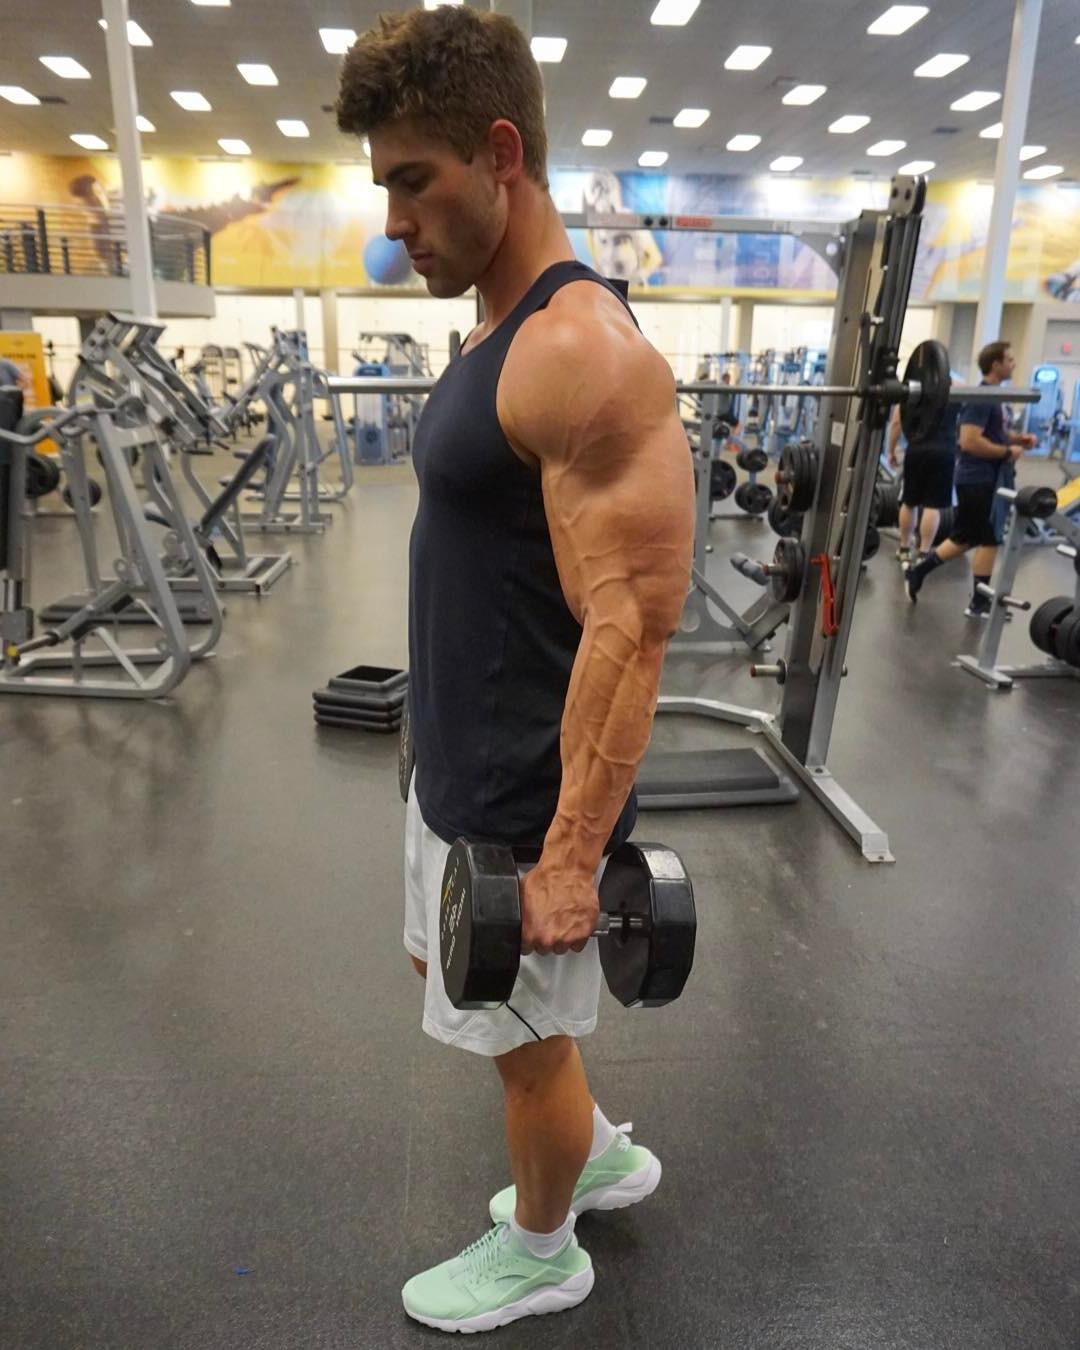 hot-gym-dude-huge-biceps-strong-veiny-arms